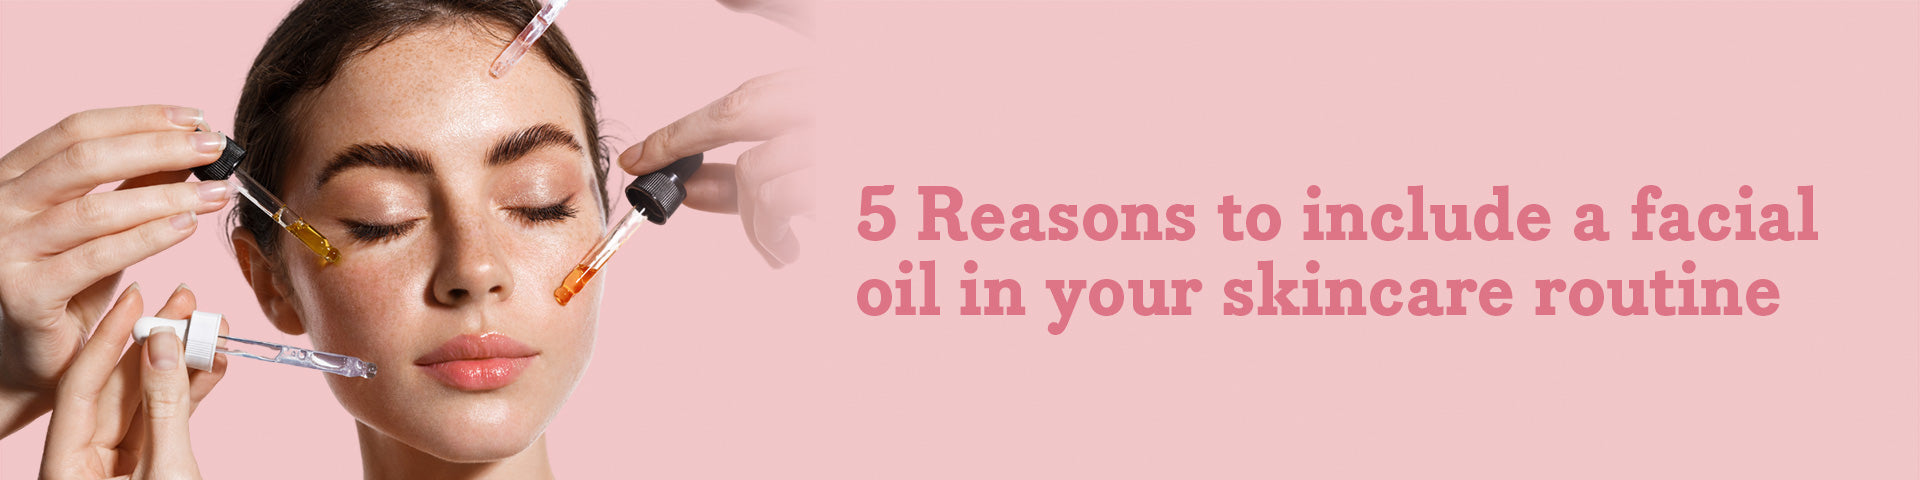 5 Reasons to Include a Facial Oil in your Skincare Routine